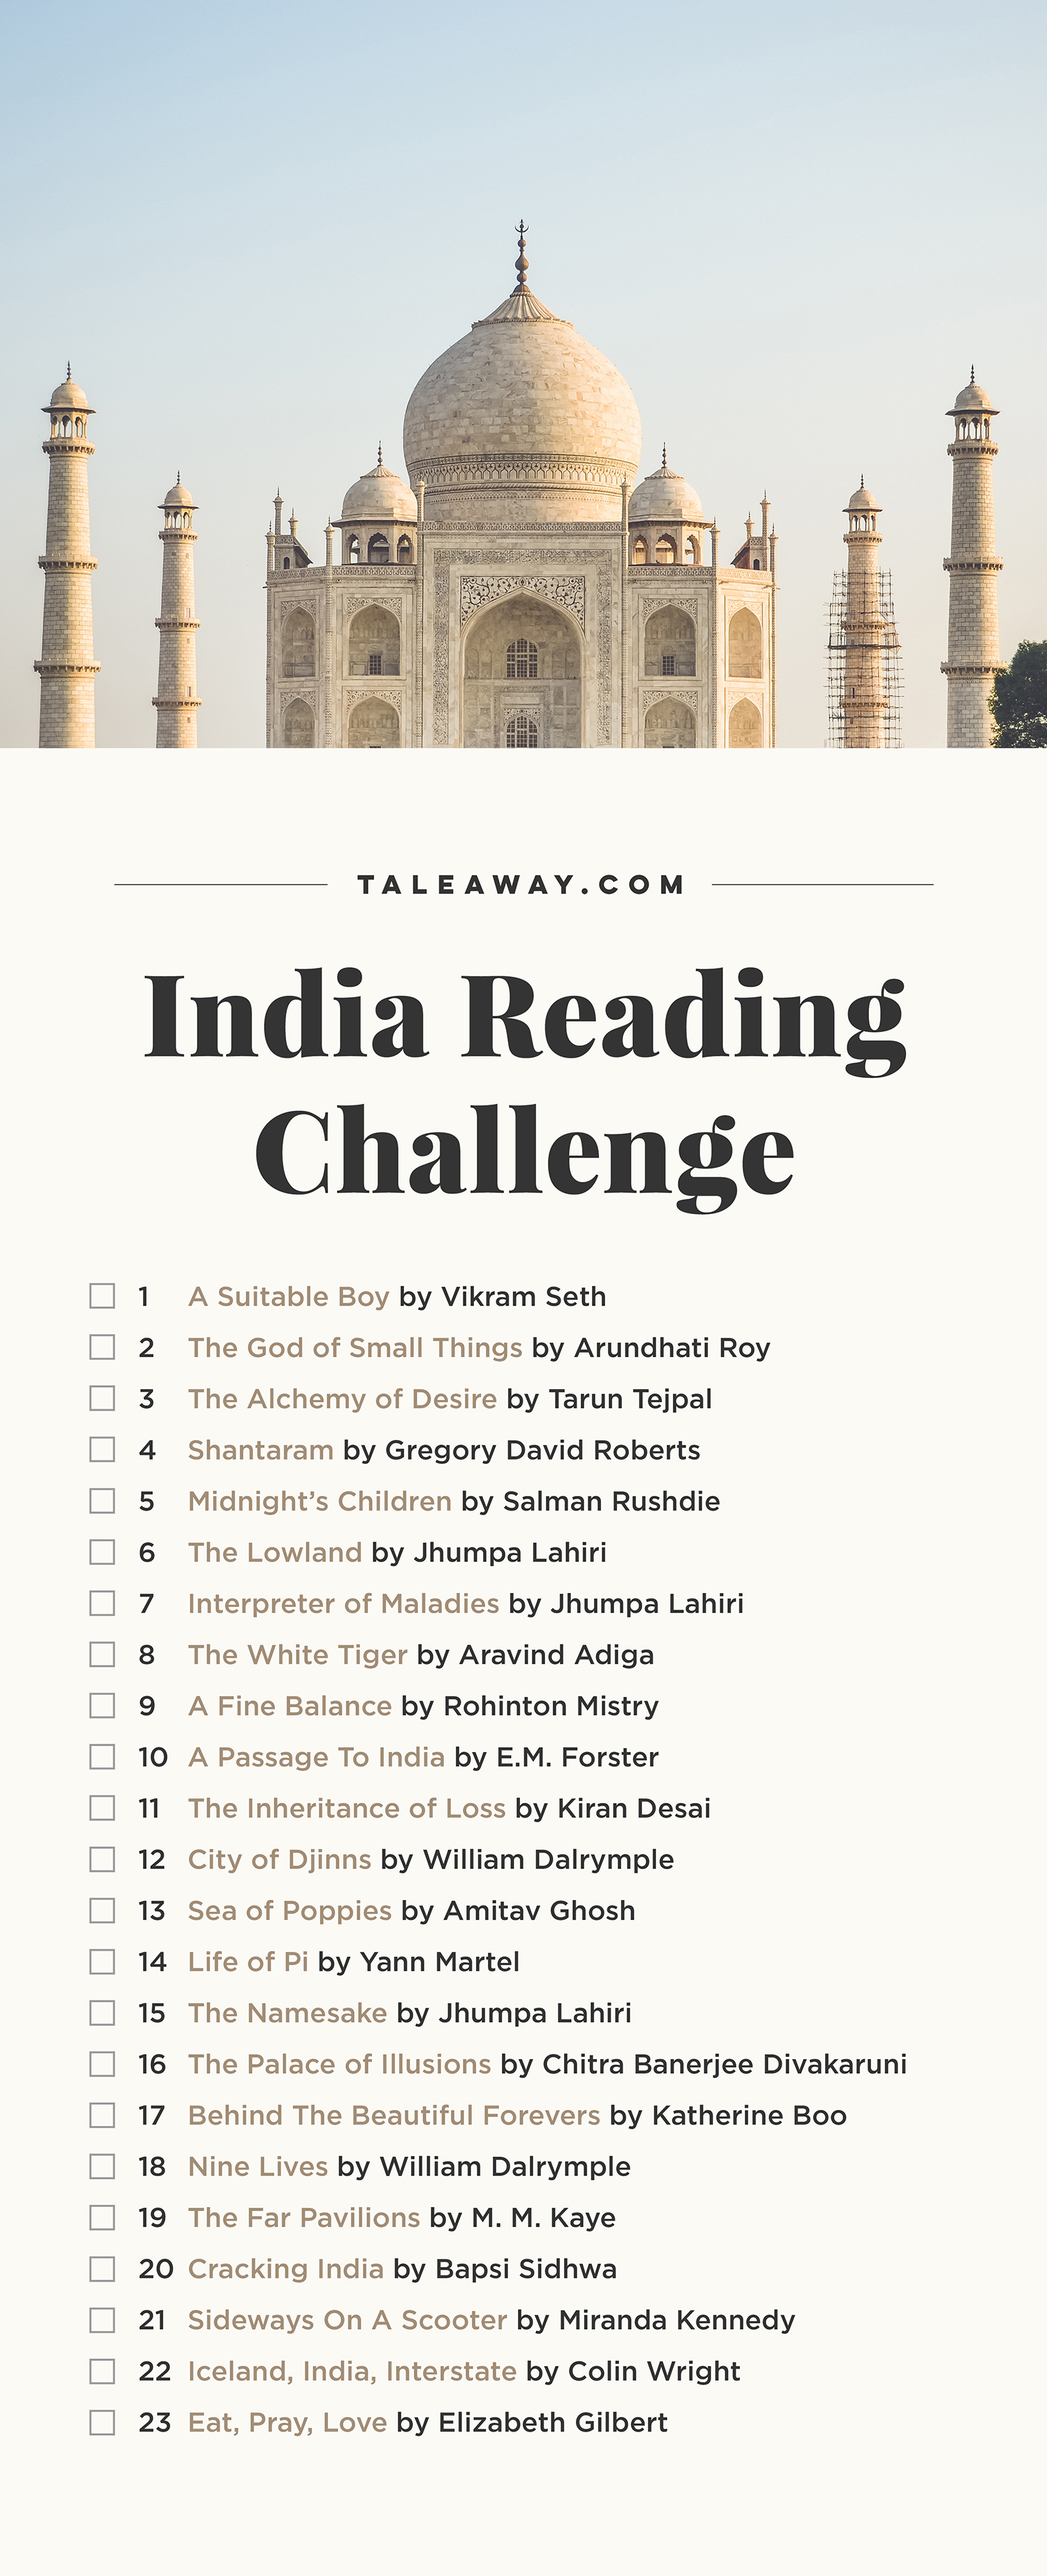 India Reading Challenge, Books Set In India - For more books visit www.taleway.com to find books set around the world. Ideas for those who like to travel, both in life and in fiction. reading challenge, india reading challenge, book challenge, books you must read, books from around the world, world books, books and travel, travel reading list, reading list, books around the world, books to read, india books, india books novels, india travel